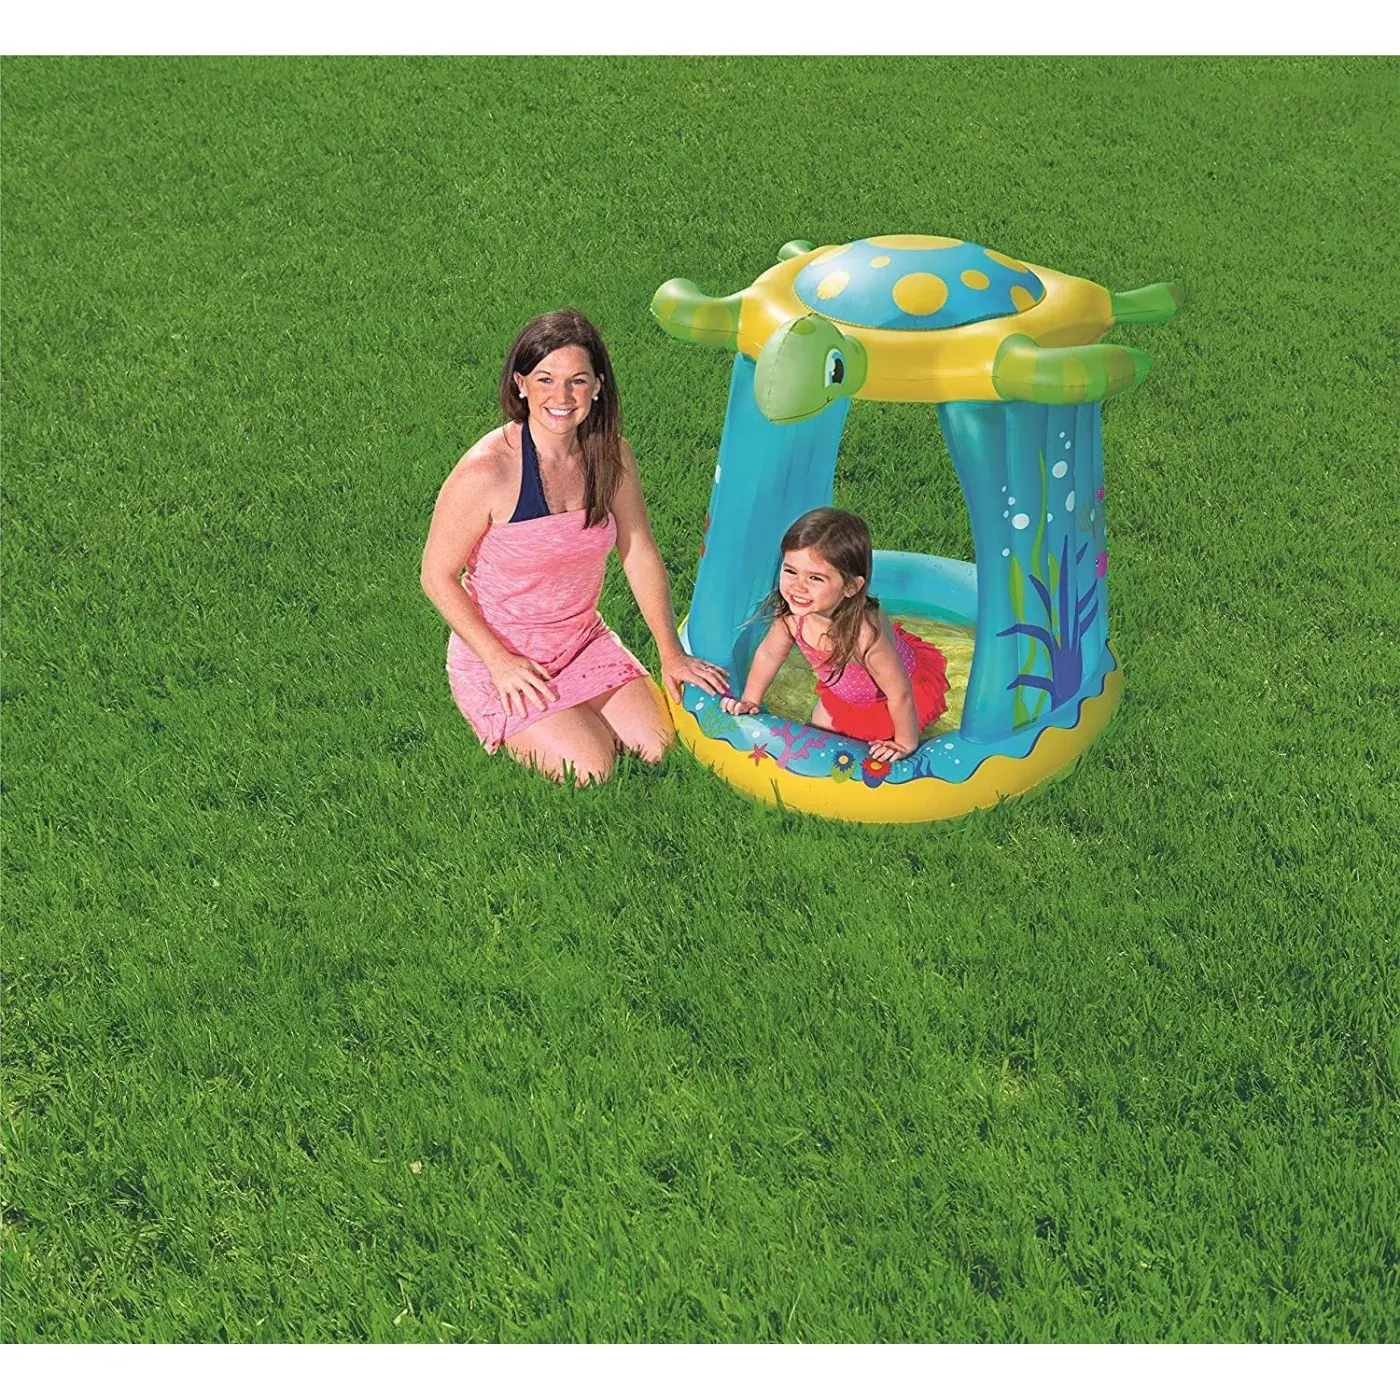 Bestway Inflatable Swimming Pool, 109 x 96 x 104 cm, Turtle design, Colors, 52219